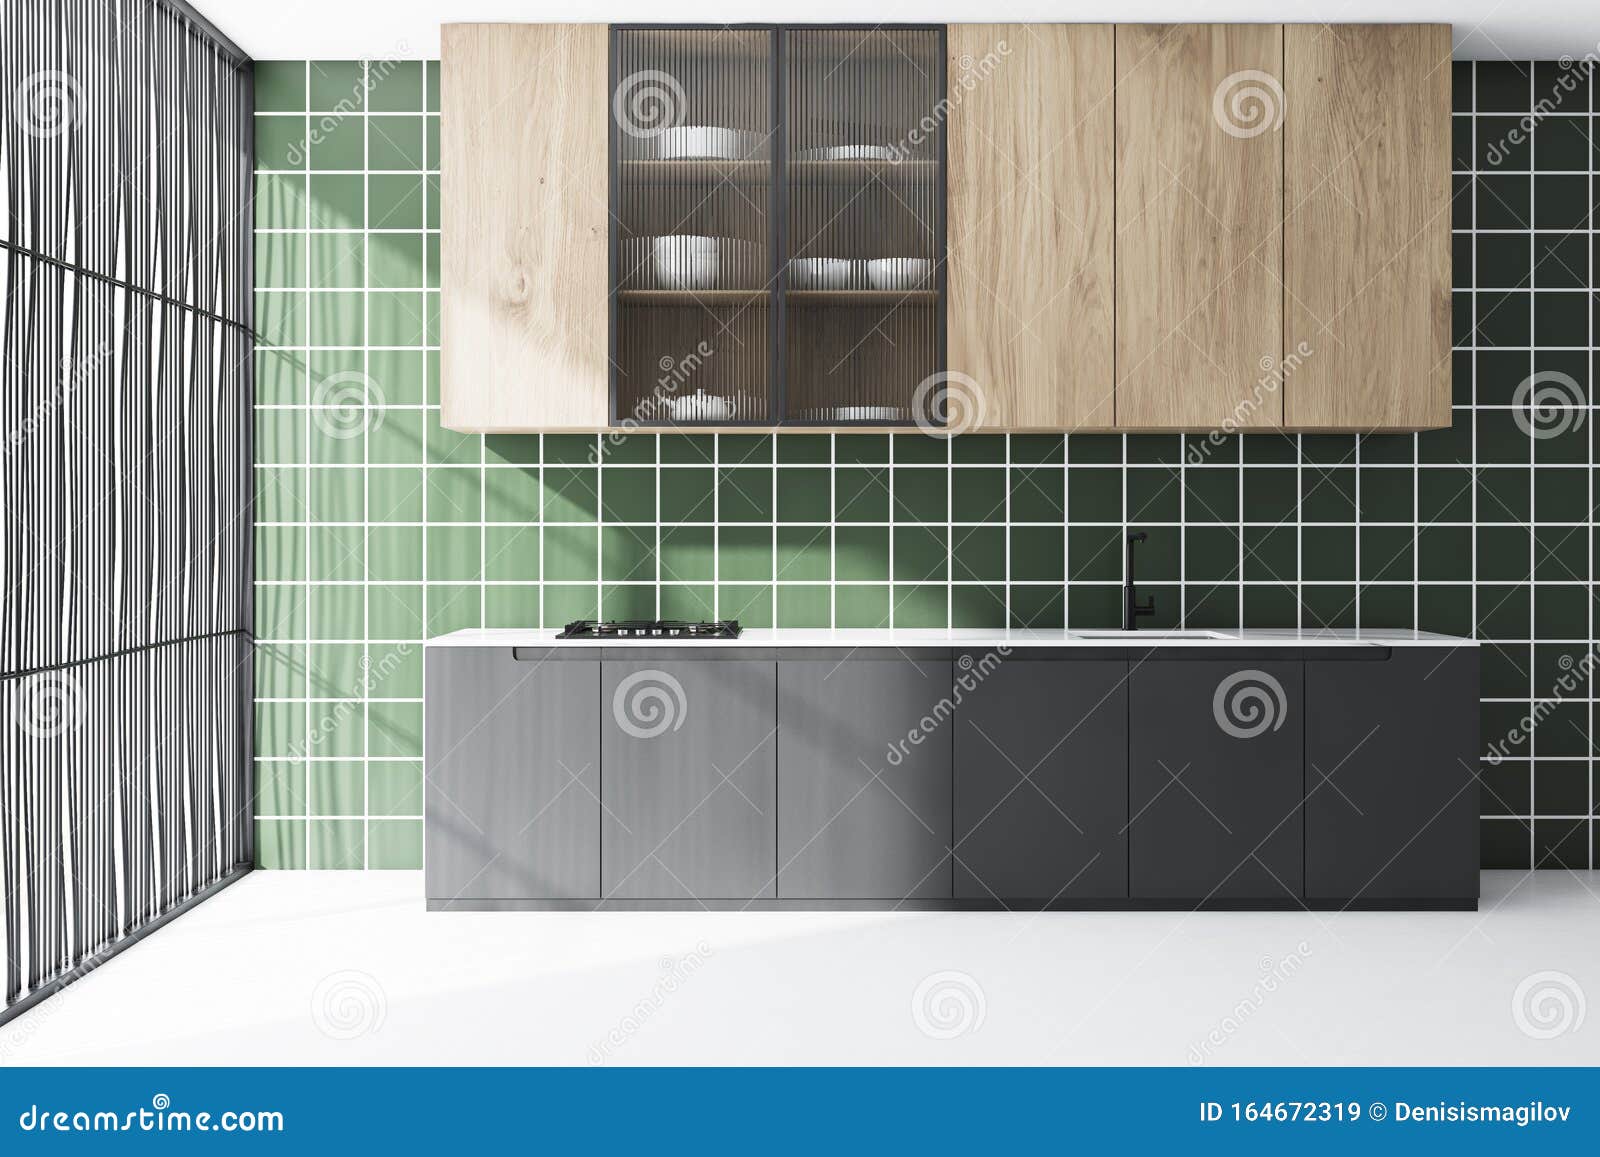 Green Tile Kitchen Interior With Gray Countertops Stock